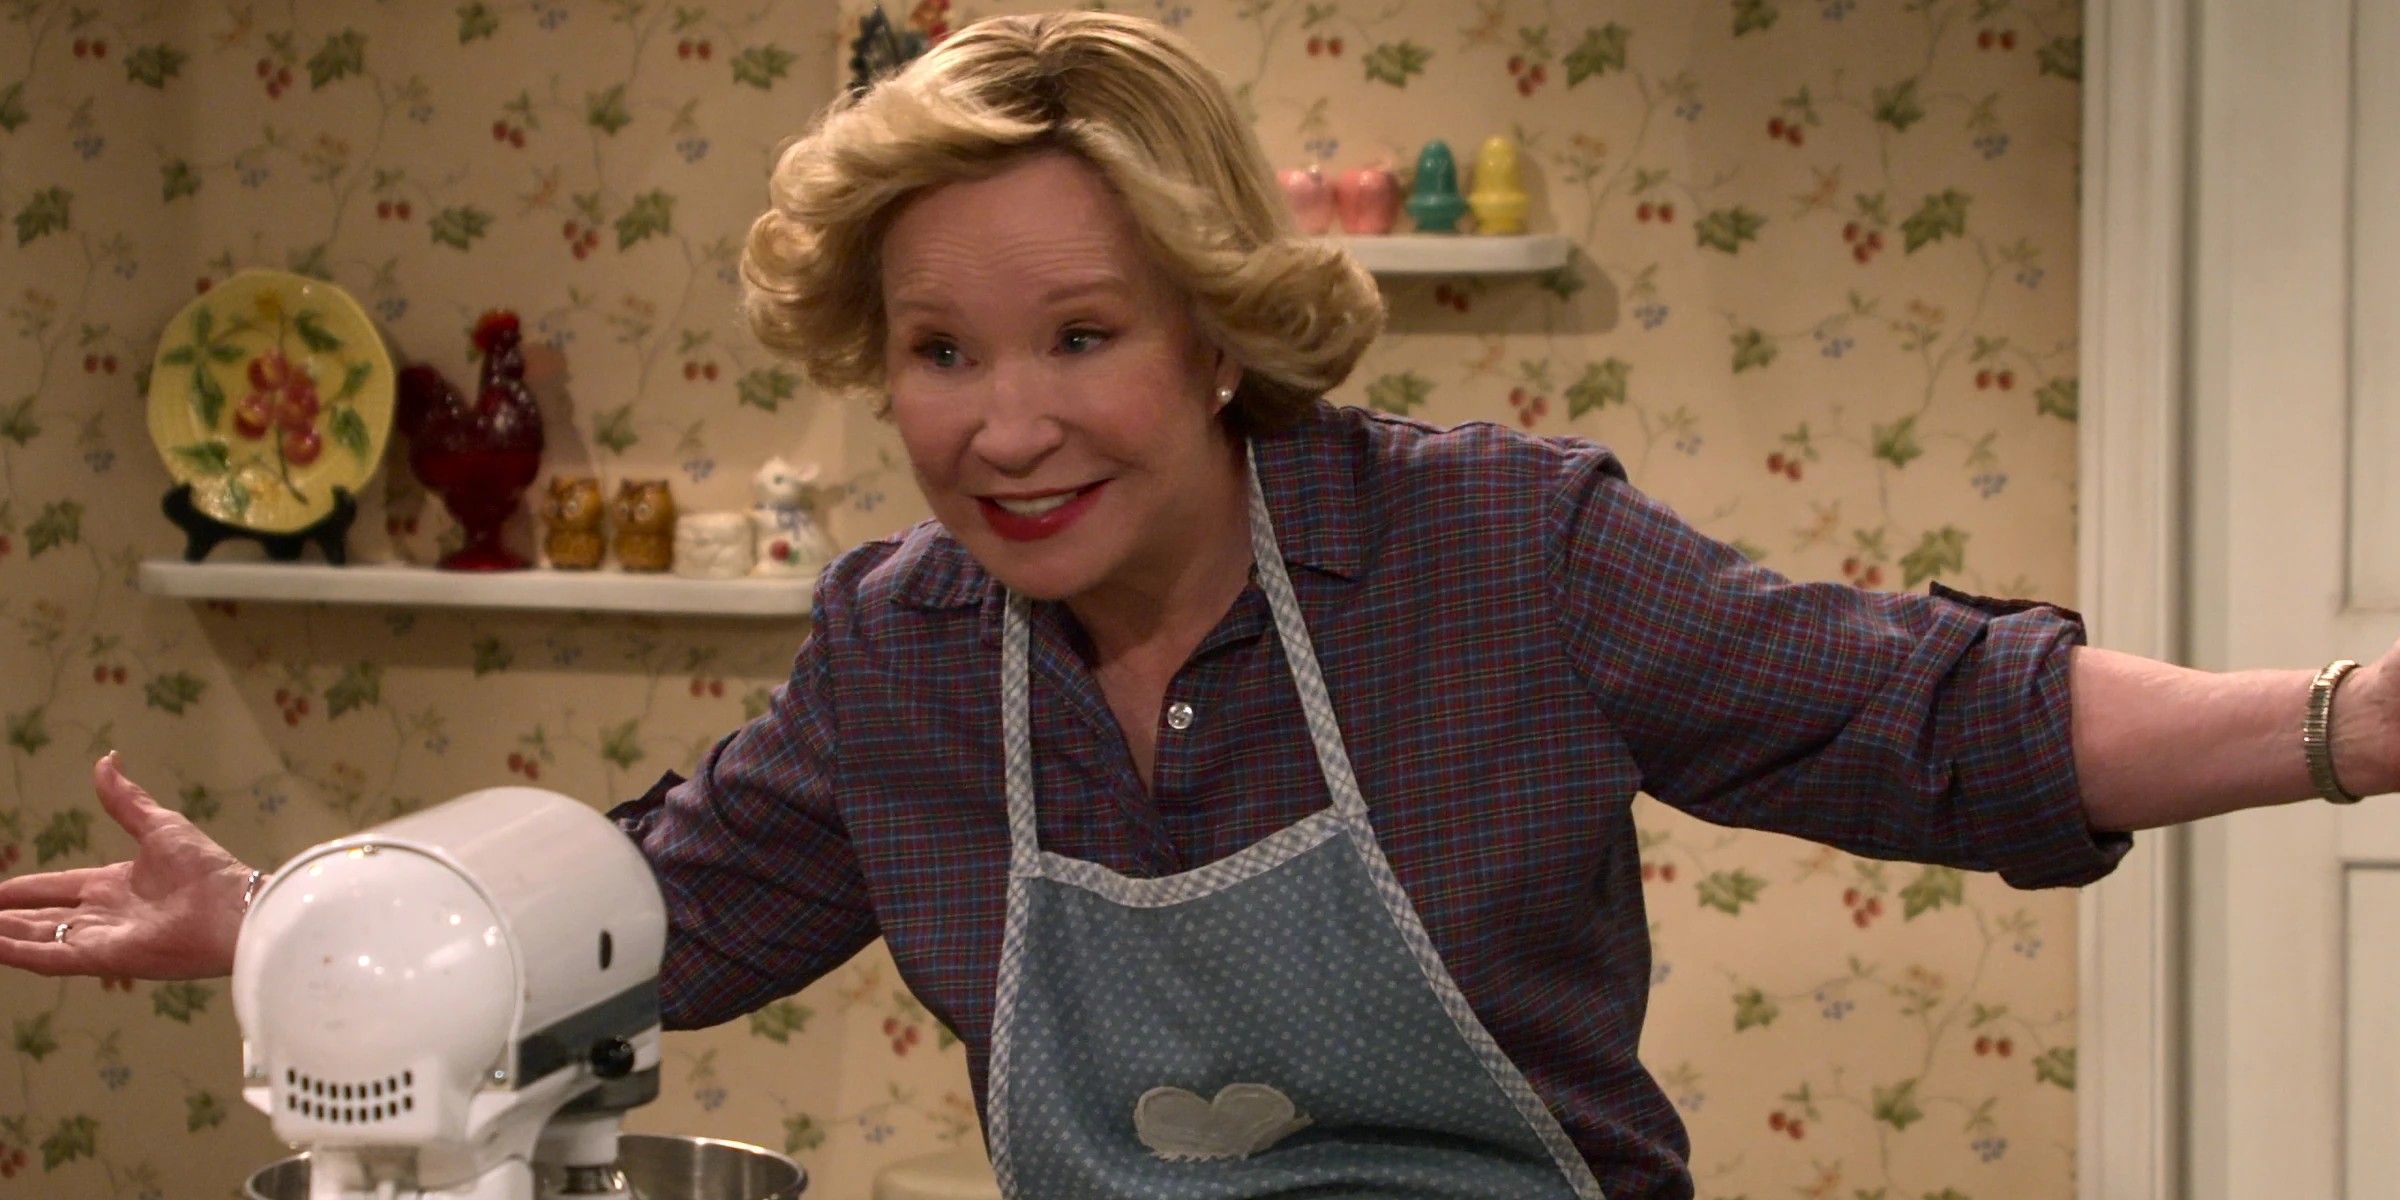 Debra Jo Rupp as Kitty in the kitchen smiling in That 90s show